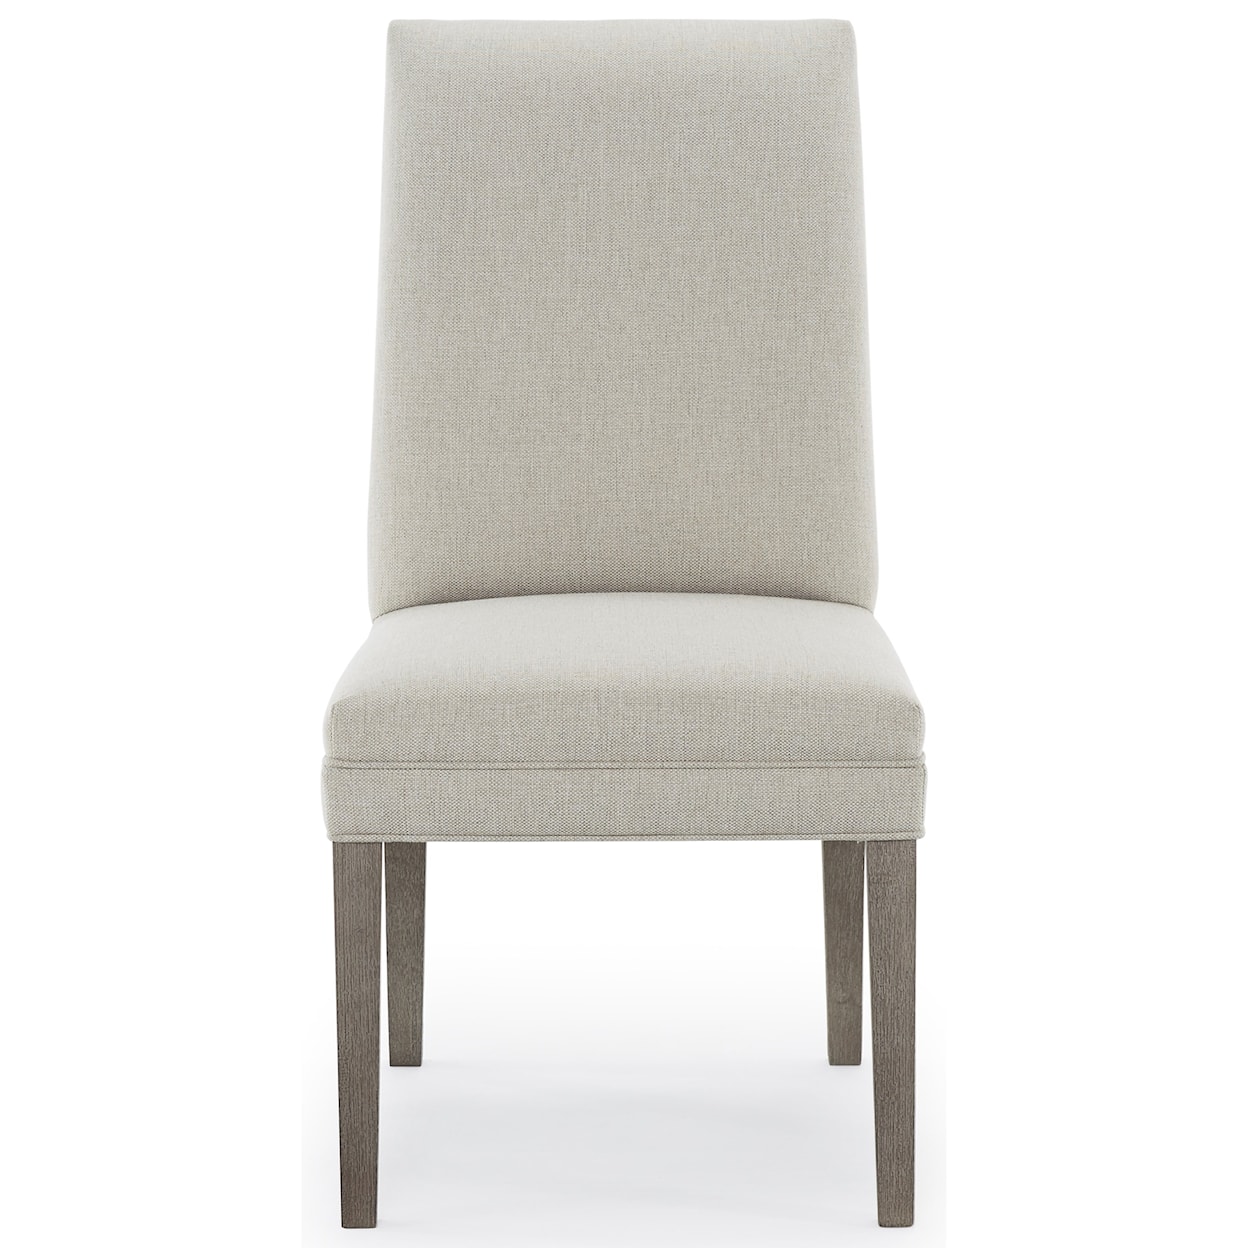 Bravo Furniture Odell Odell Parsons Chair